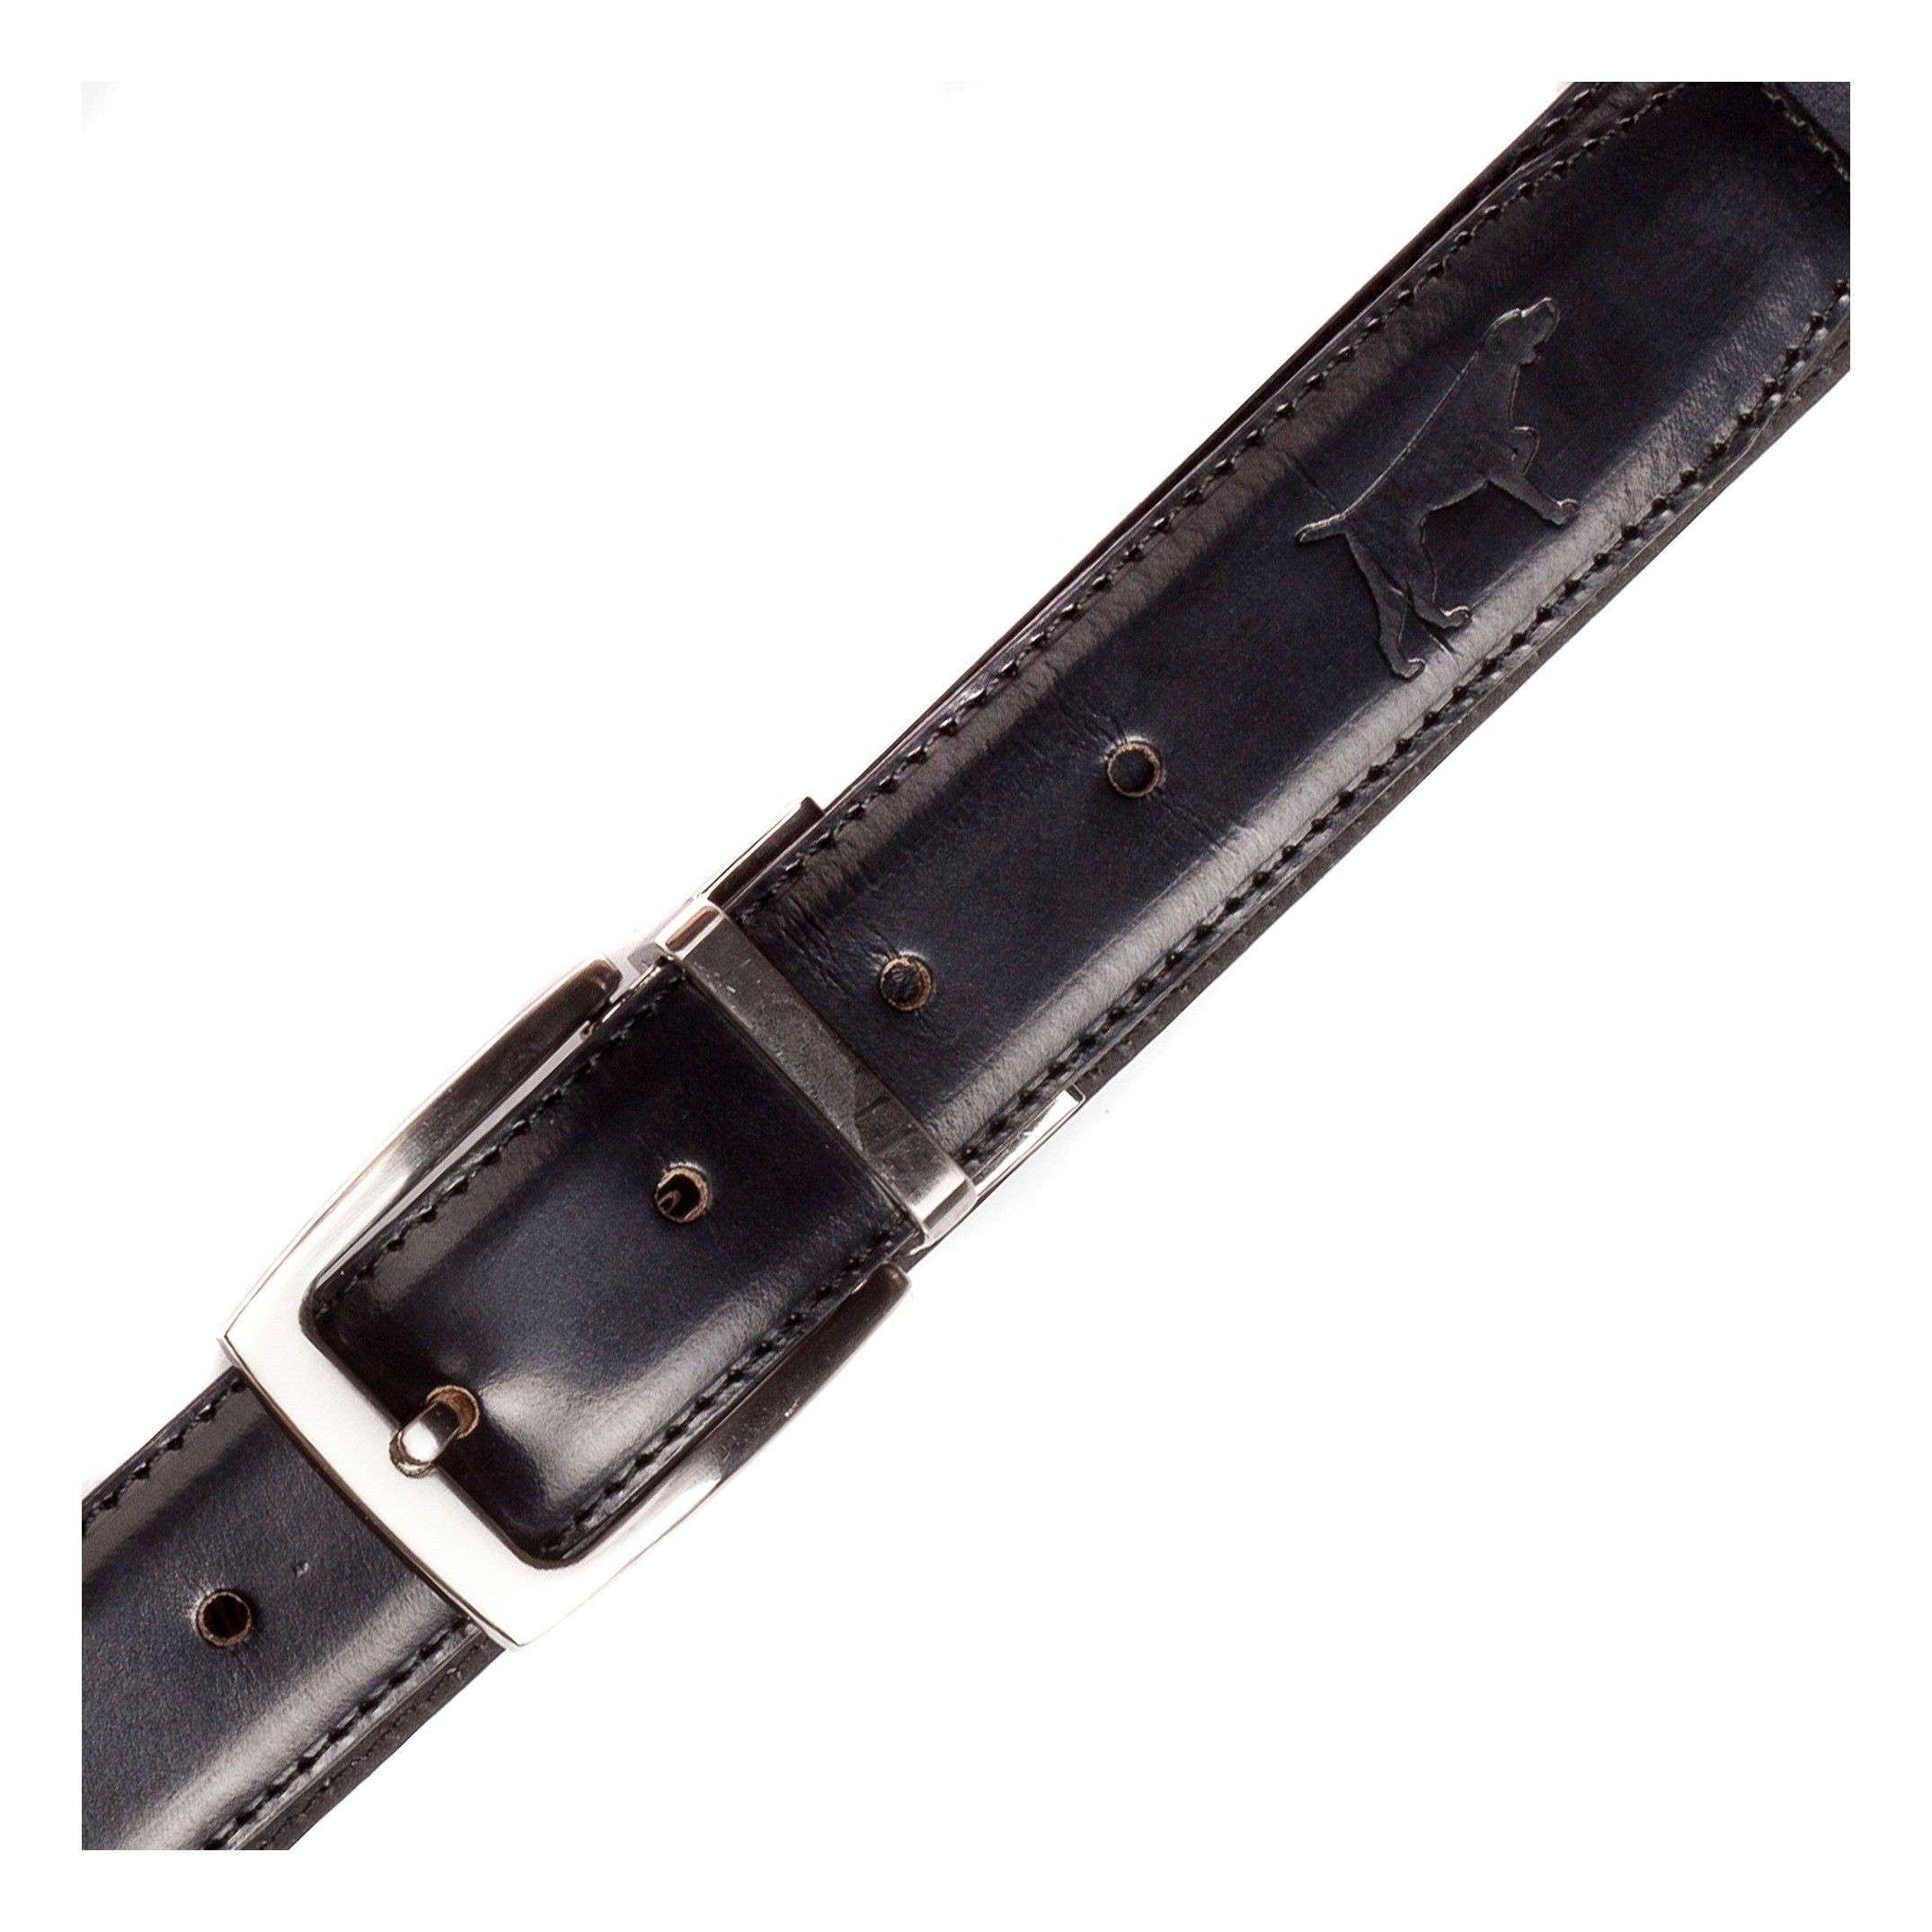 Adjustable belt. Florentic leather. Removable metal buckle to adapt the belt. Width of 3,3 cm. Large of 100 cm & 115 cm. Black color. Classic style.